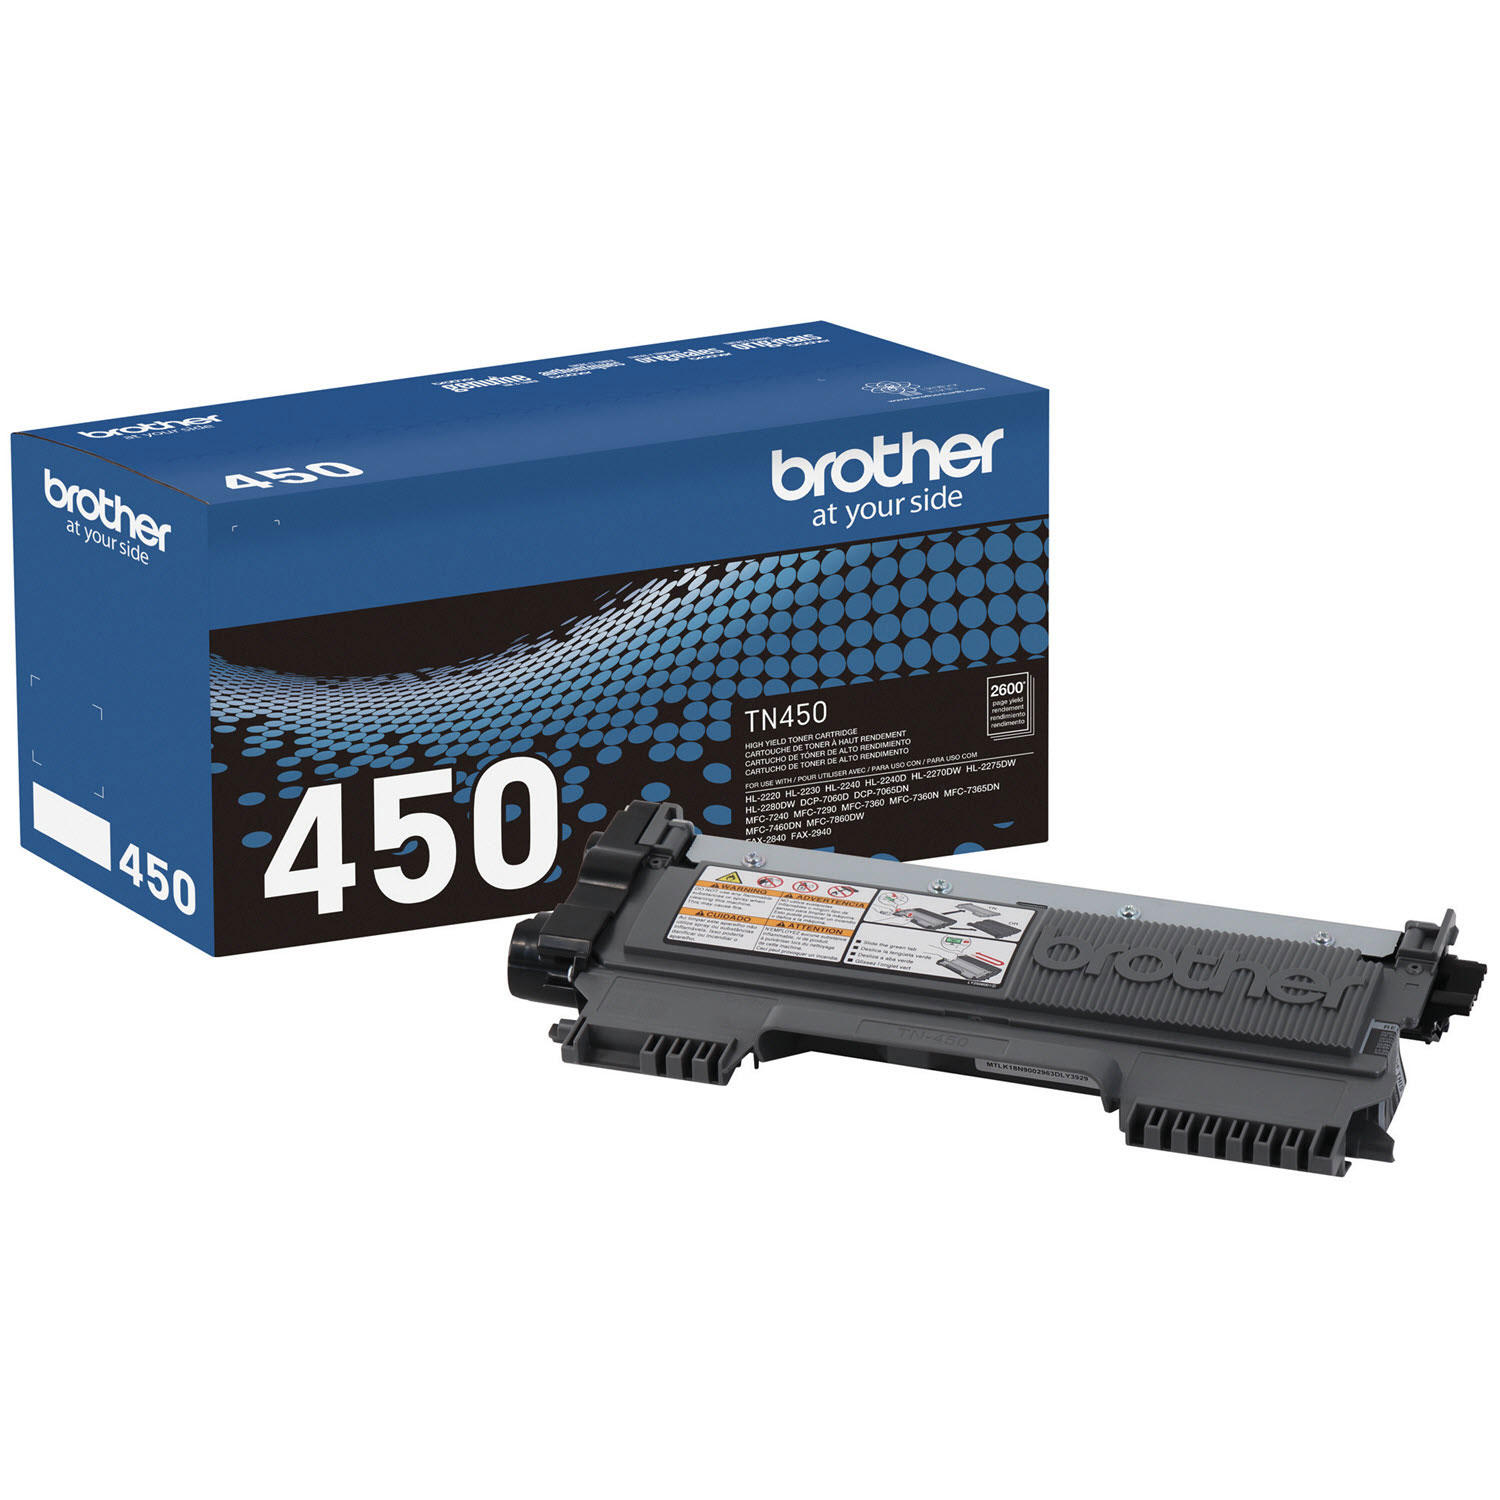 Brother - TN450 High Yield Toner Cartridge, Black - Save $5 with purchase of Member's Mark Multipurpose Bright Copy